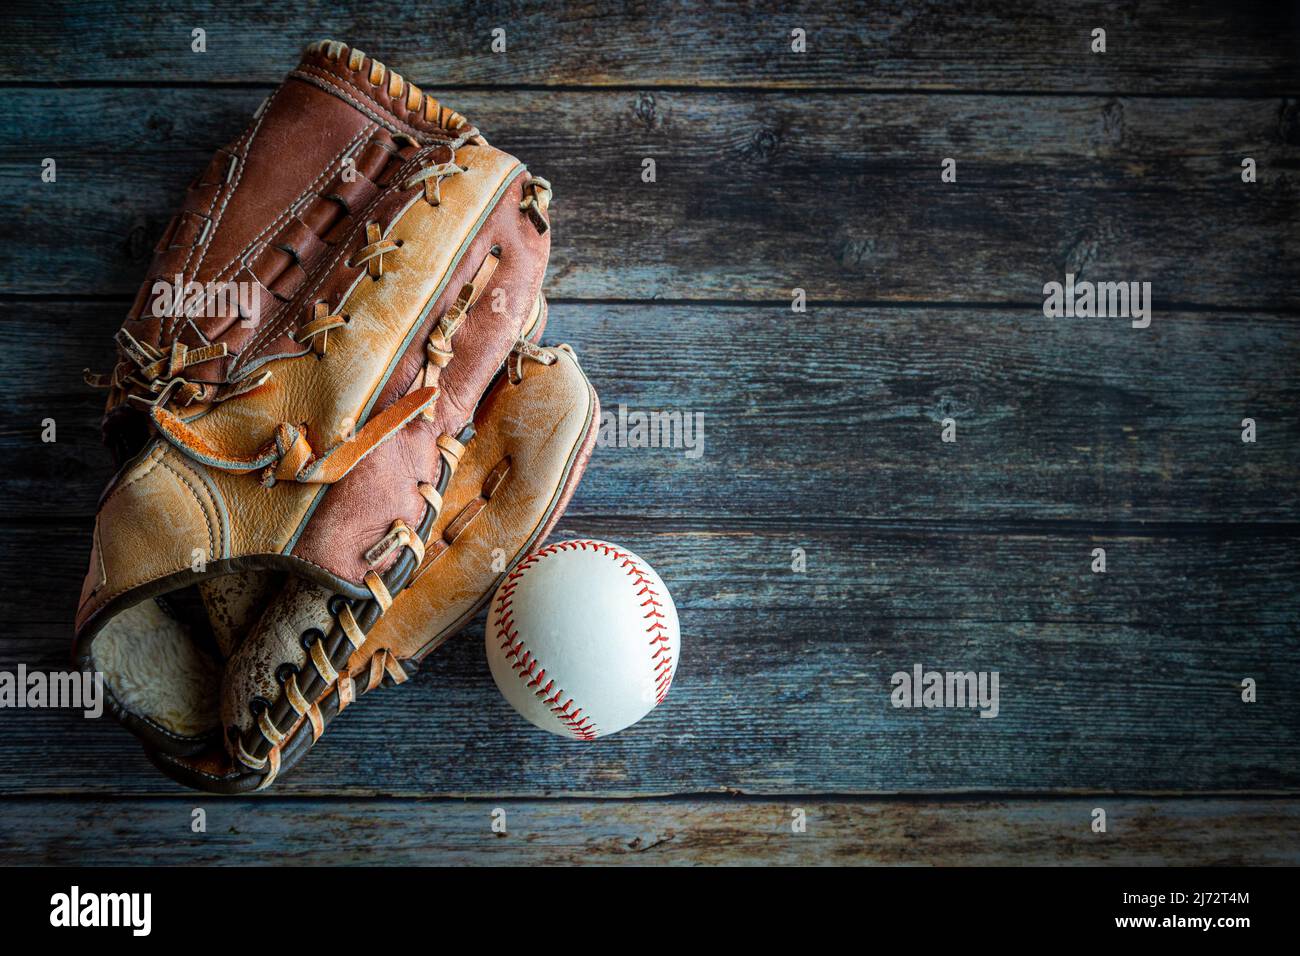 Leather baseball or softball glove with ball on rustic wooden background with copy space. Stock Photo